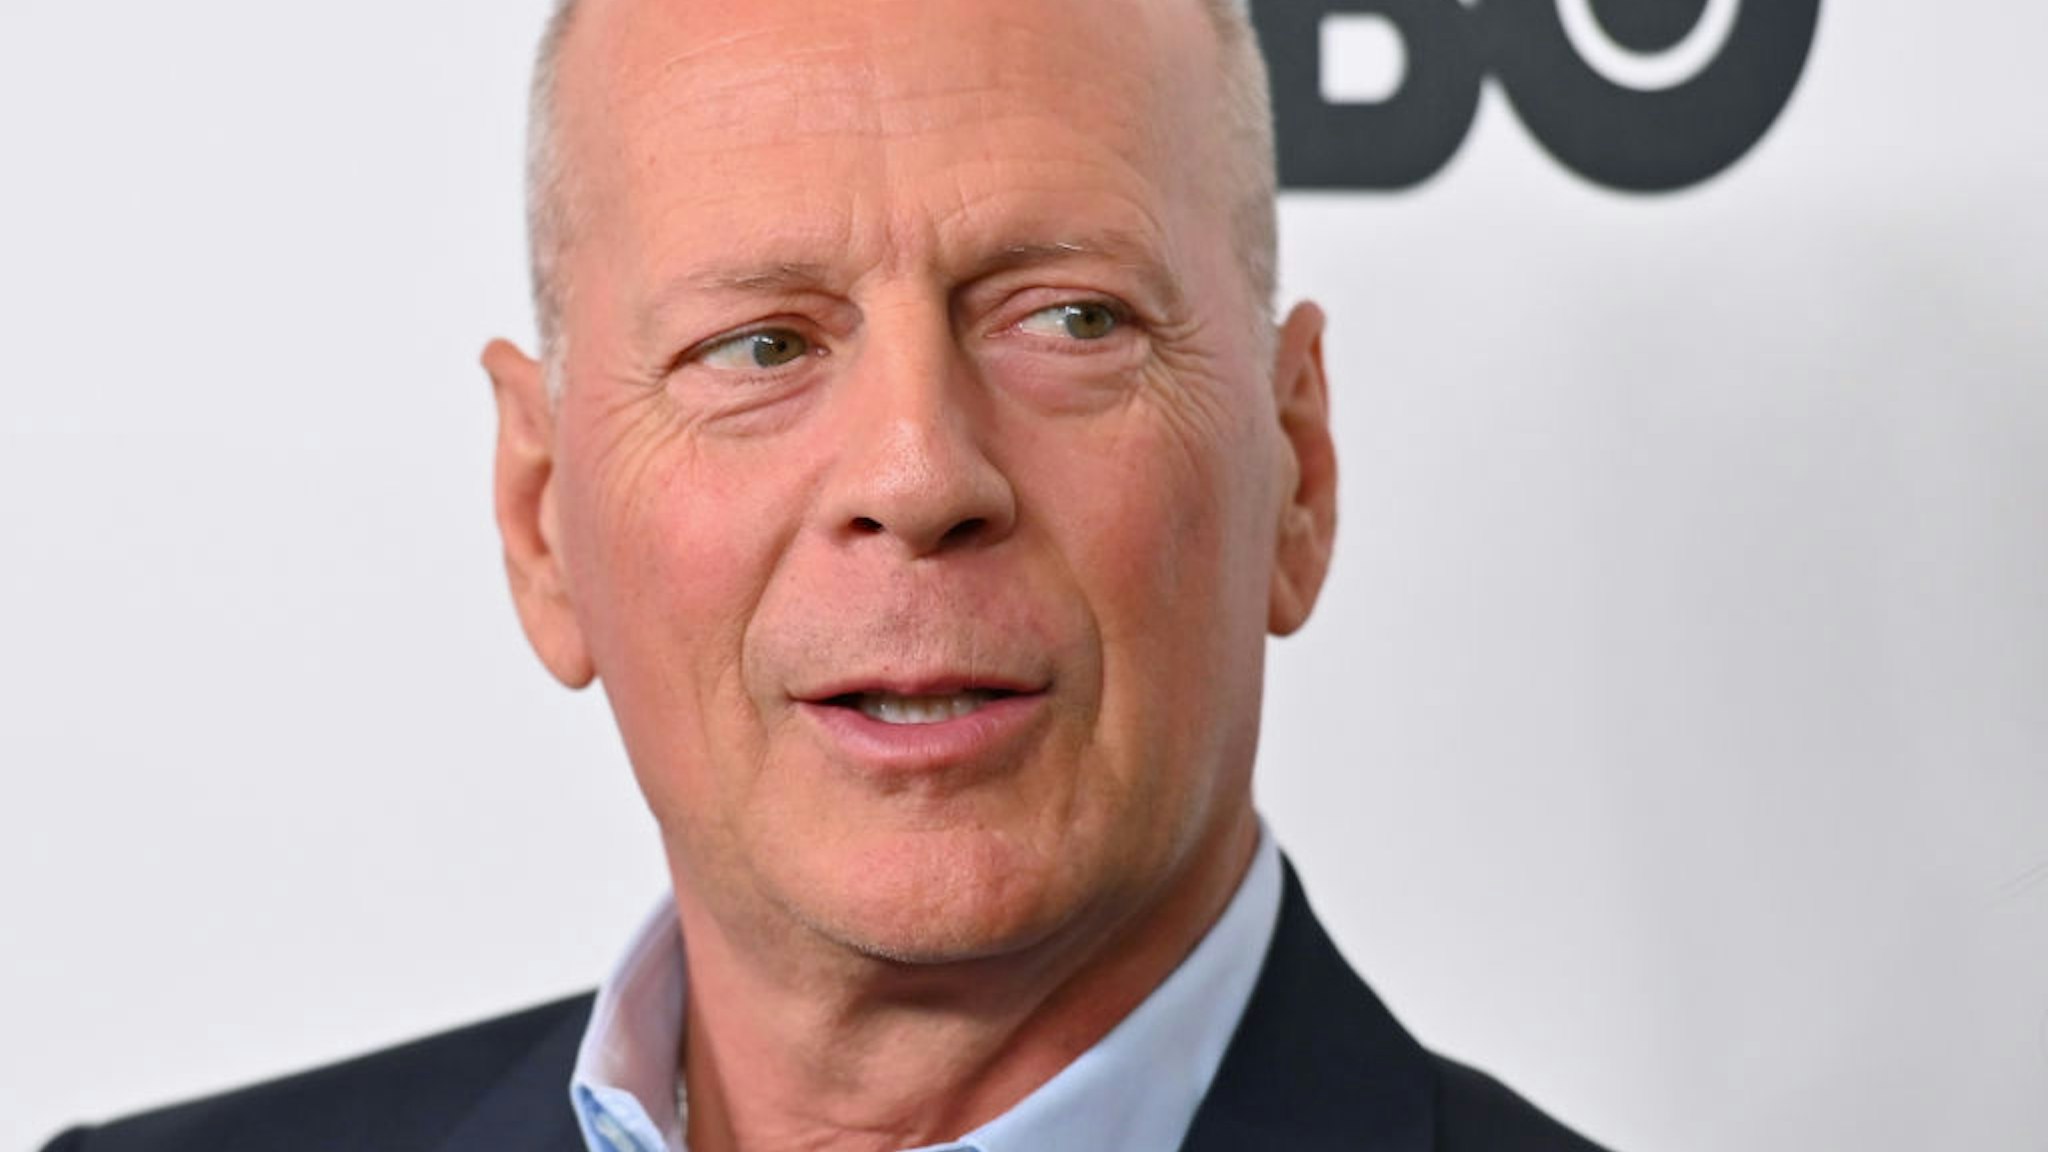 US actor Bruce Willis attends the premiere of "Motherless Brooklyn" during the 57th New York Film Festival at Alice Tully Hall on October 11, 2019 in New York City.